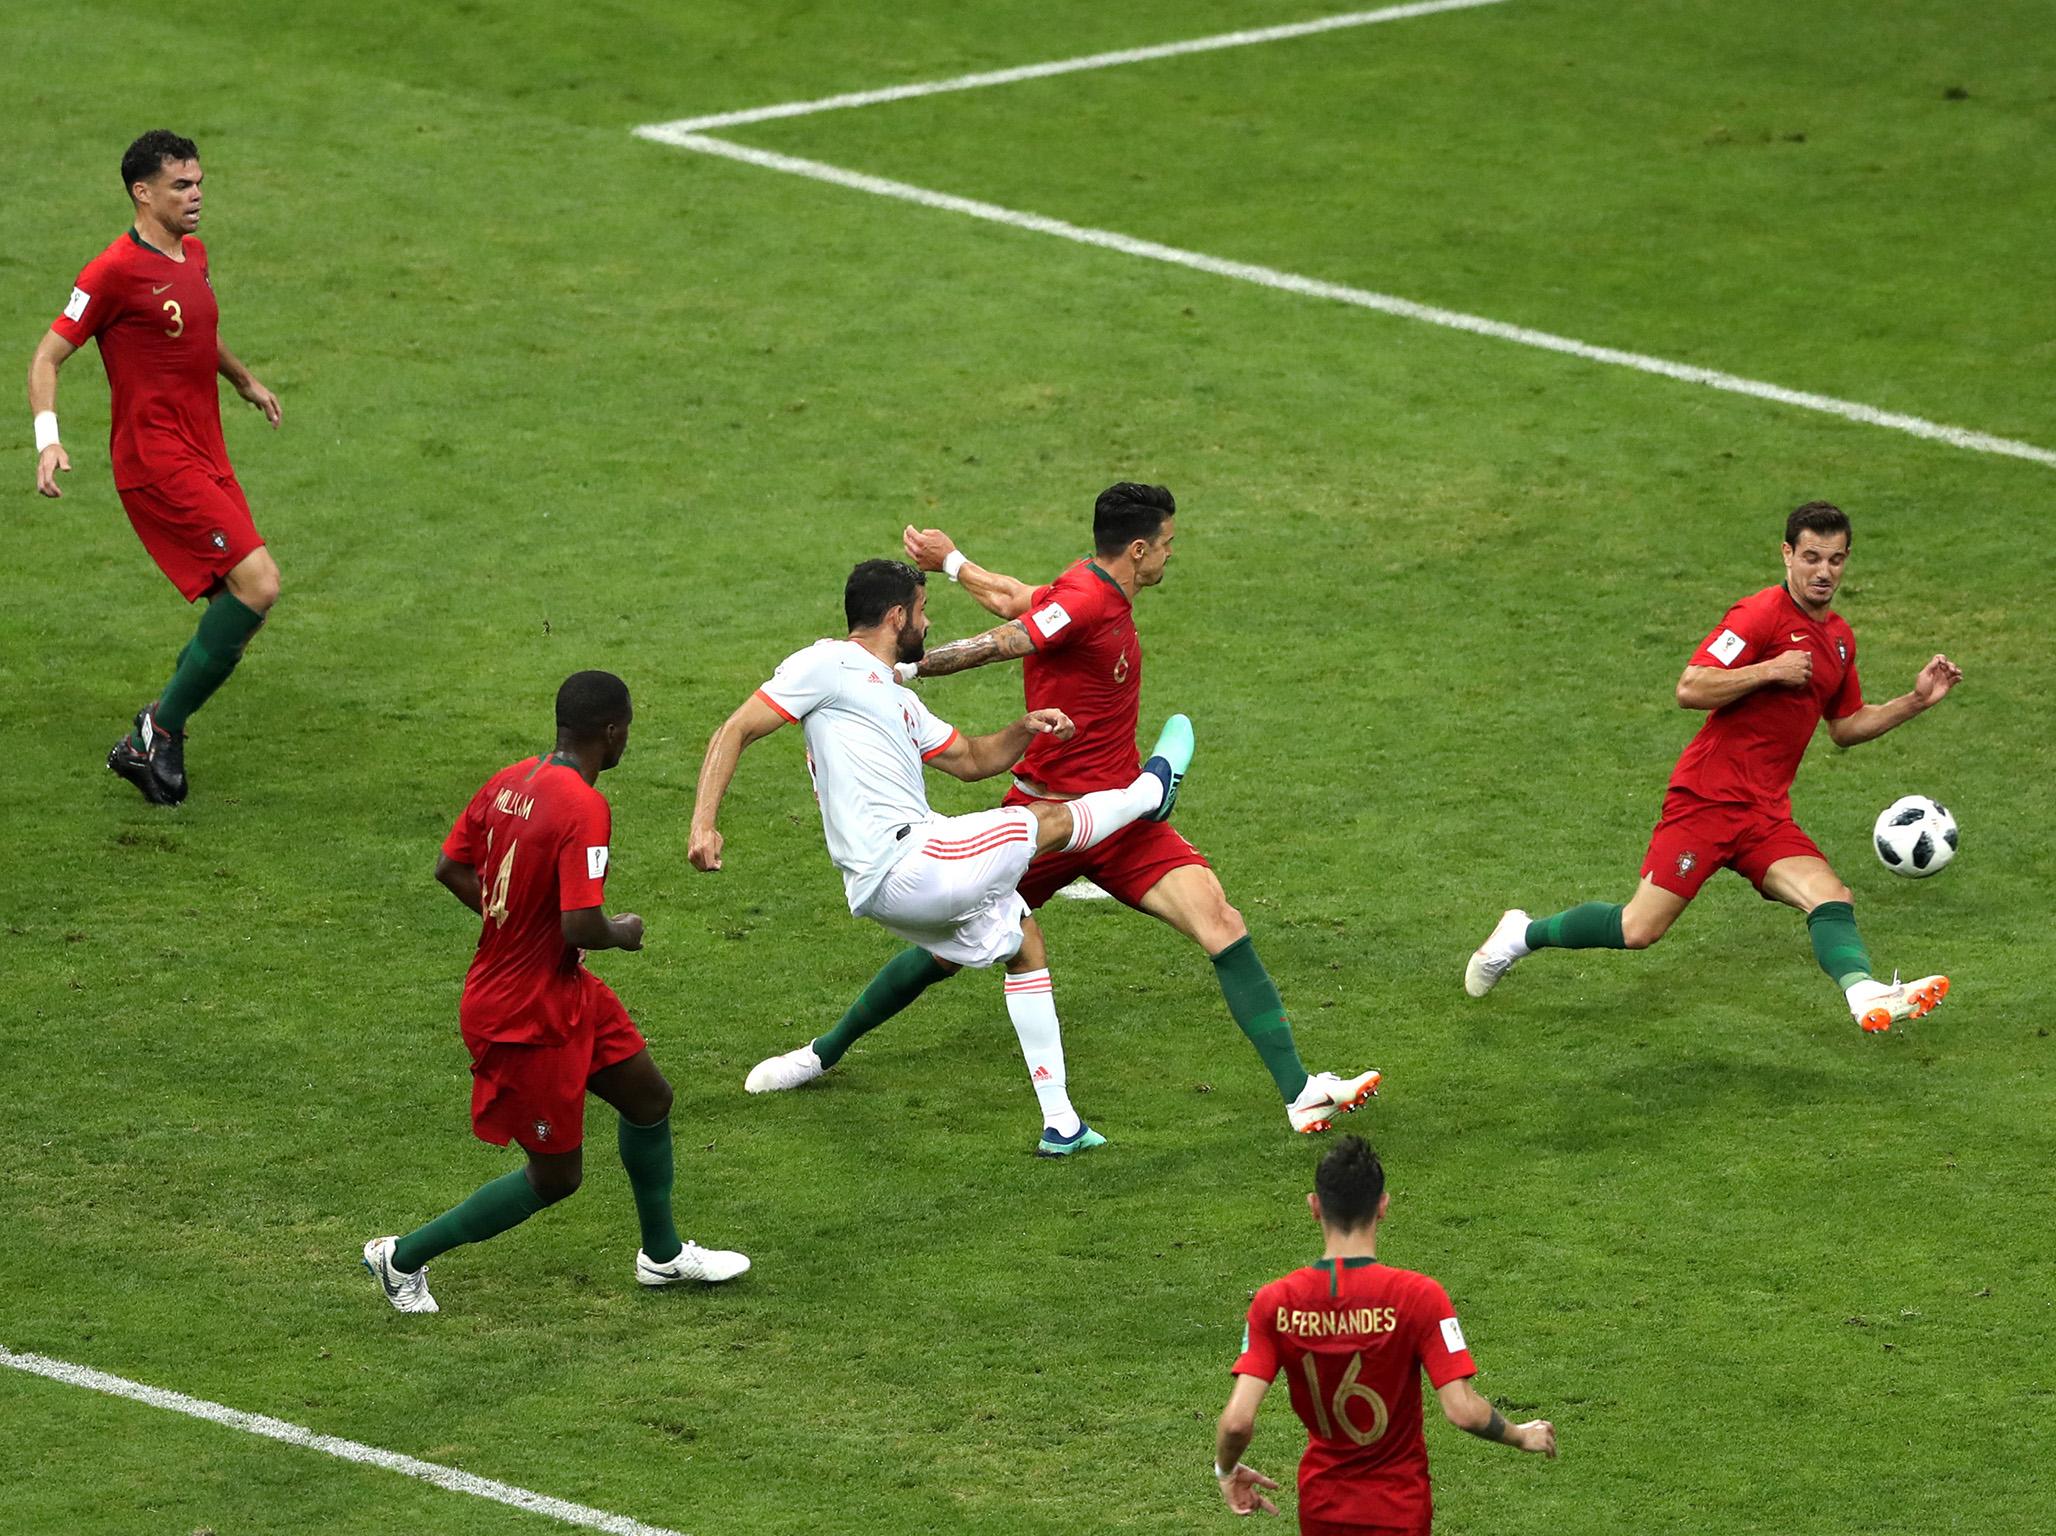 Spain vs Portugal: Diego Costa goal makes history with first VAR decision at a World Cup | The Independent